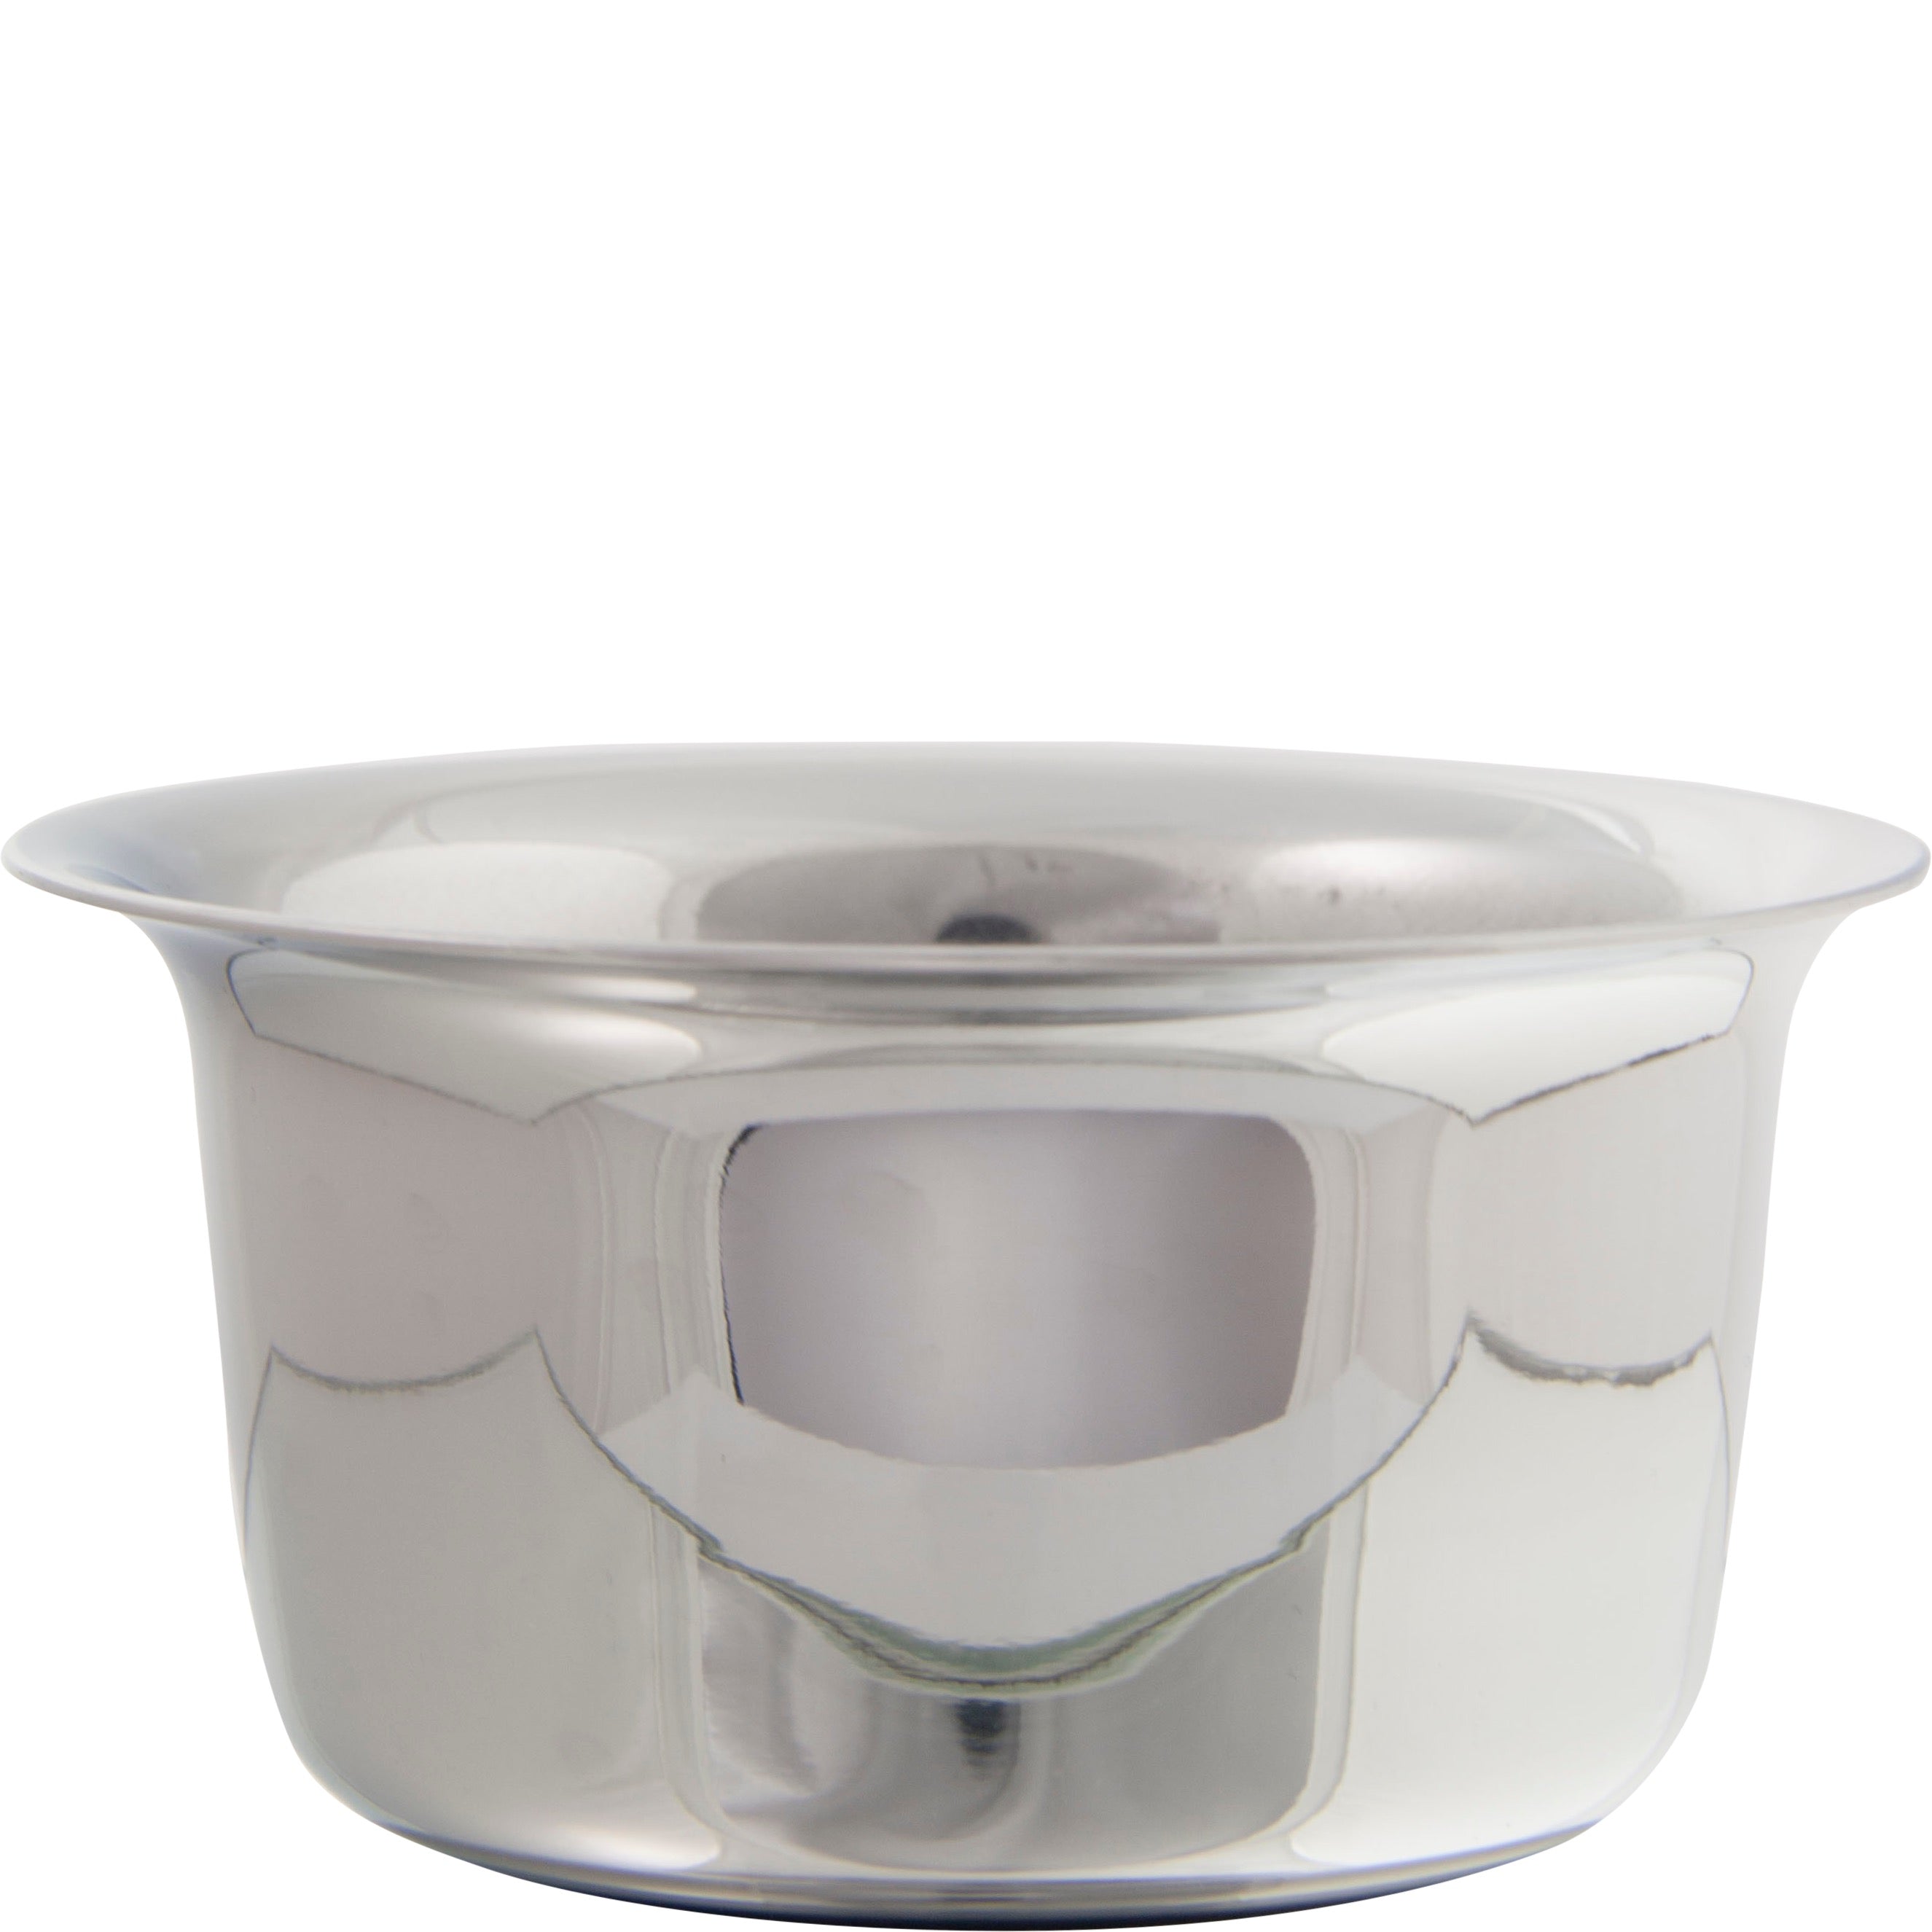 Shaving bowl or soap tray from stainless steel